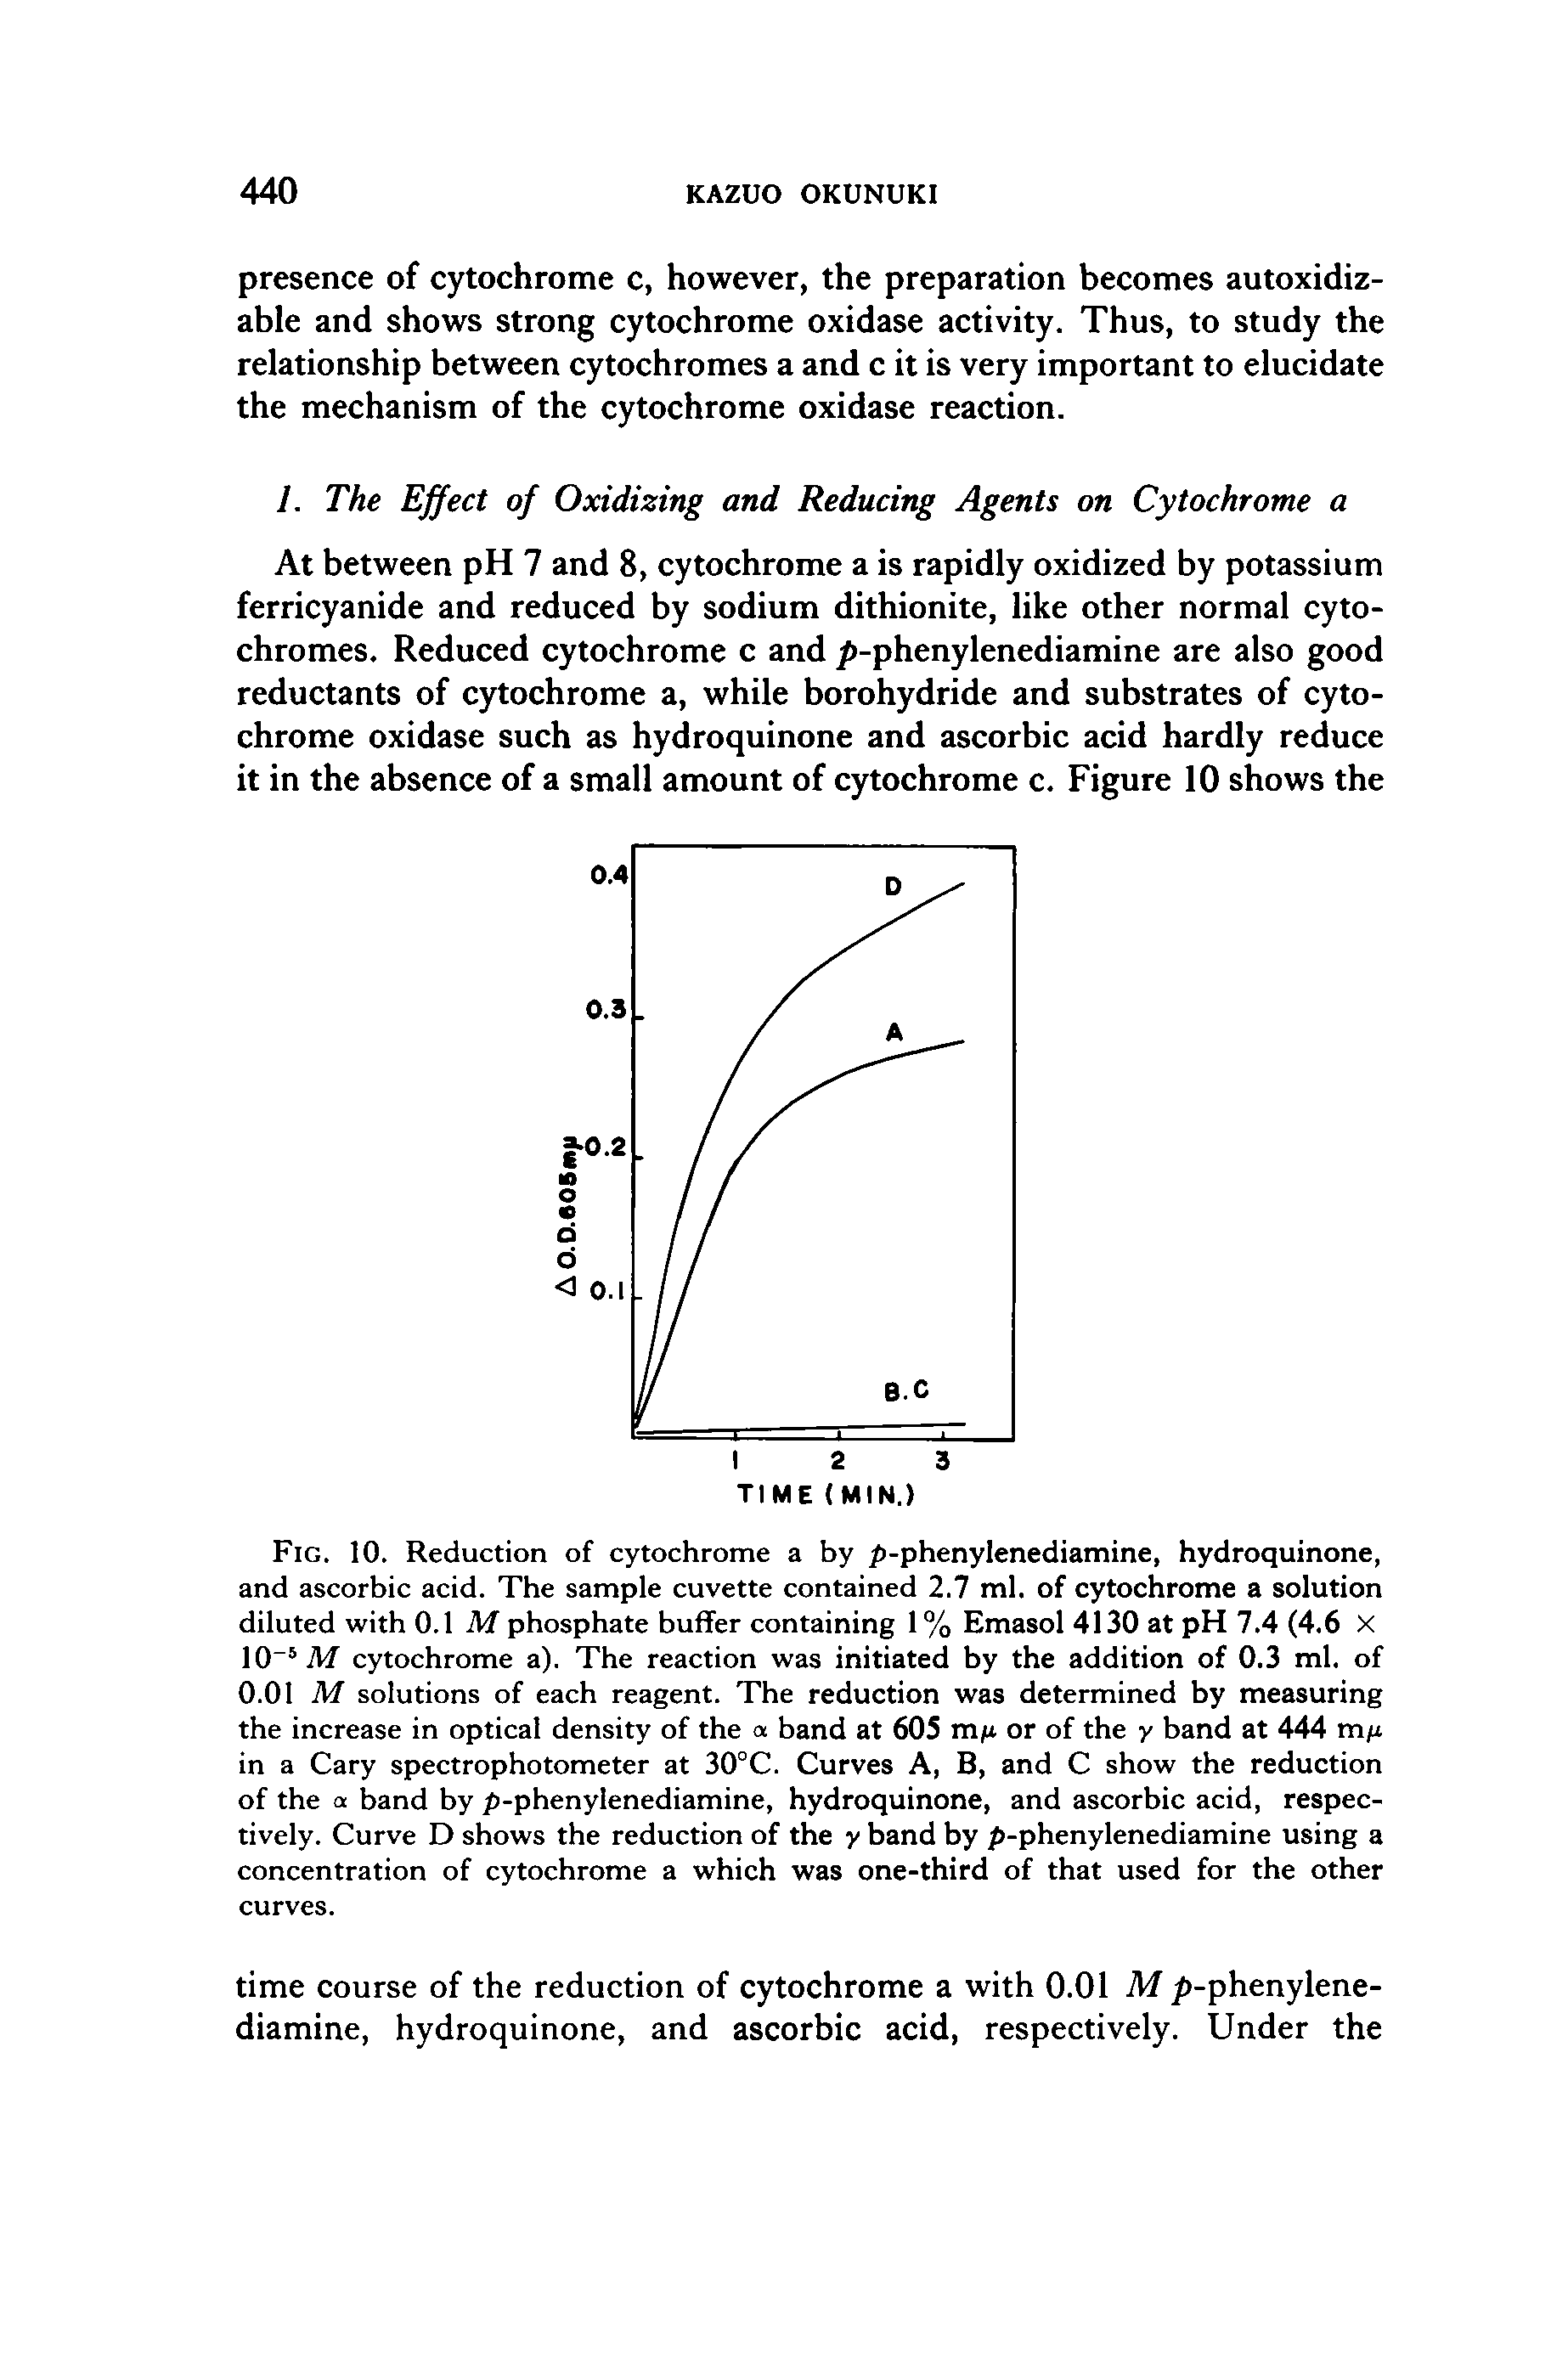 Fig. 10. Reduction of cytochrome a by /)-phenylenediamine, hydroquinone, and ascorbic acid. The sample cuvette contained 2.7 ml. of cytochrome a solution diluted with 0.1 M phosphate buffer containing 1% Emasol 4130 at pH 7.4 (4.6 X 10 M cytochrome a). The reaction was initiated by the addition of 0.3 ml. of 0.01 M solutions of each reagent. The reduction was determined by measuring the increase in optical density of the a band at 605 mj or of the y band at 444 mu in a Cary spectrophotometer at 30°C. Curves A, B, and C show the reduction of the a band by p-pbenylenediamine, hydroquinone, and ascorbic acid, respectively. Curve D shows the reduction of the y band by p-phenylenediamine using a concentration of cytochrome a which was one-third of that used for the other curves.